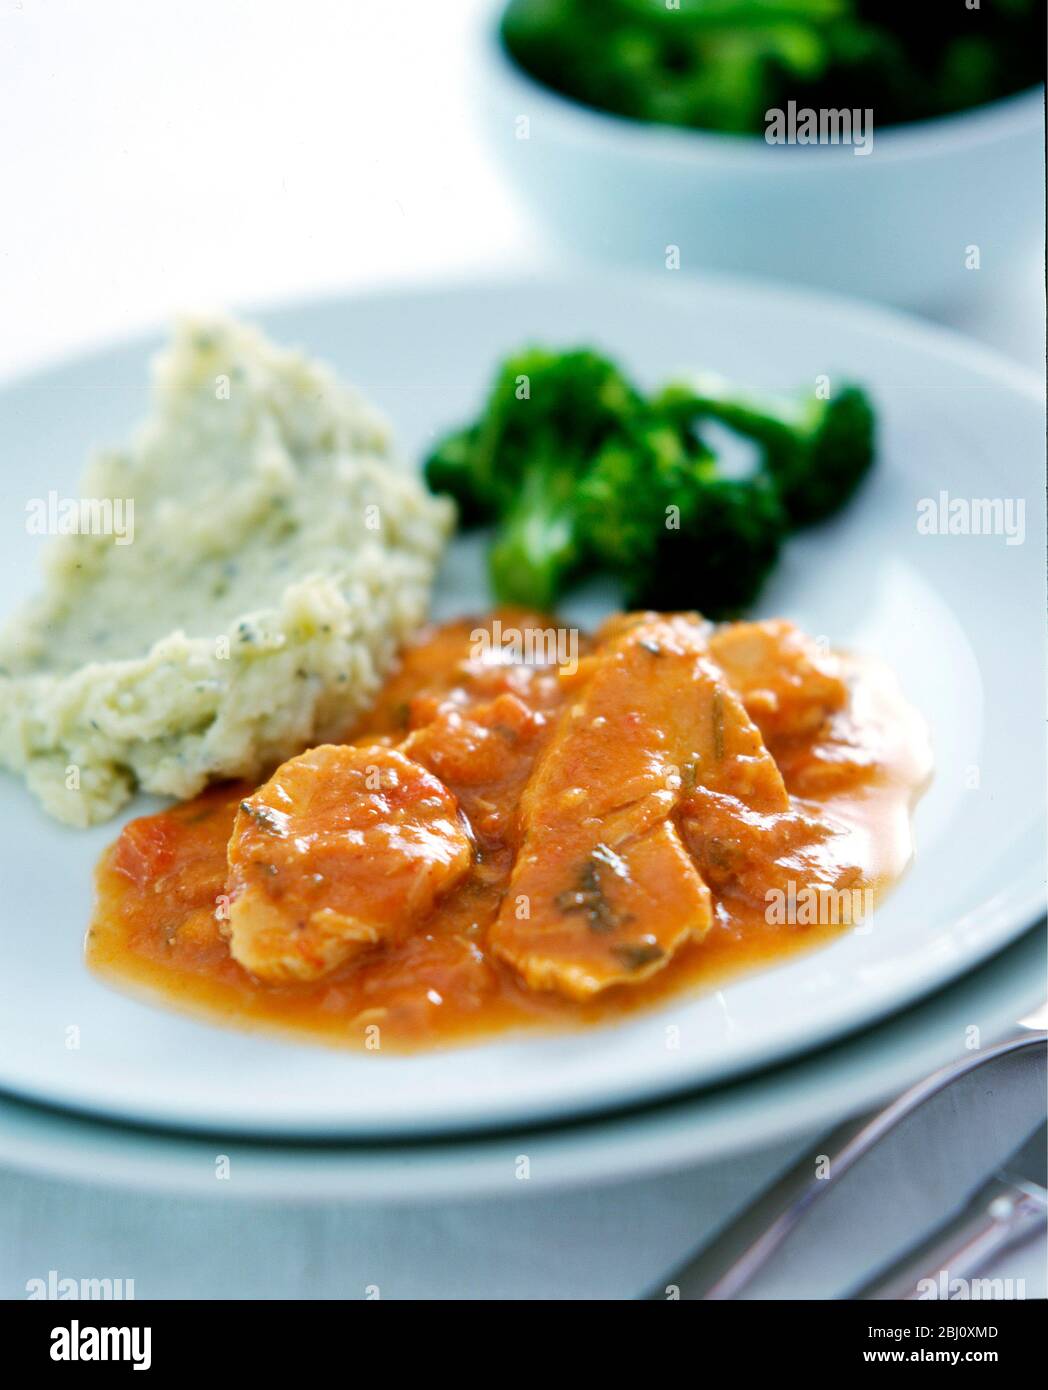 Pork cooked with a creamy tomato sauce served with herbed mashed potato and brocolli - Stock Photo